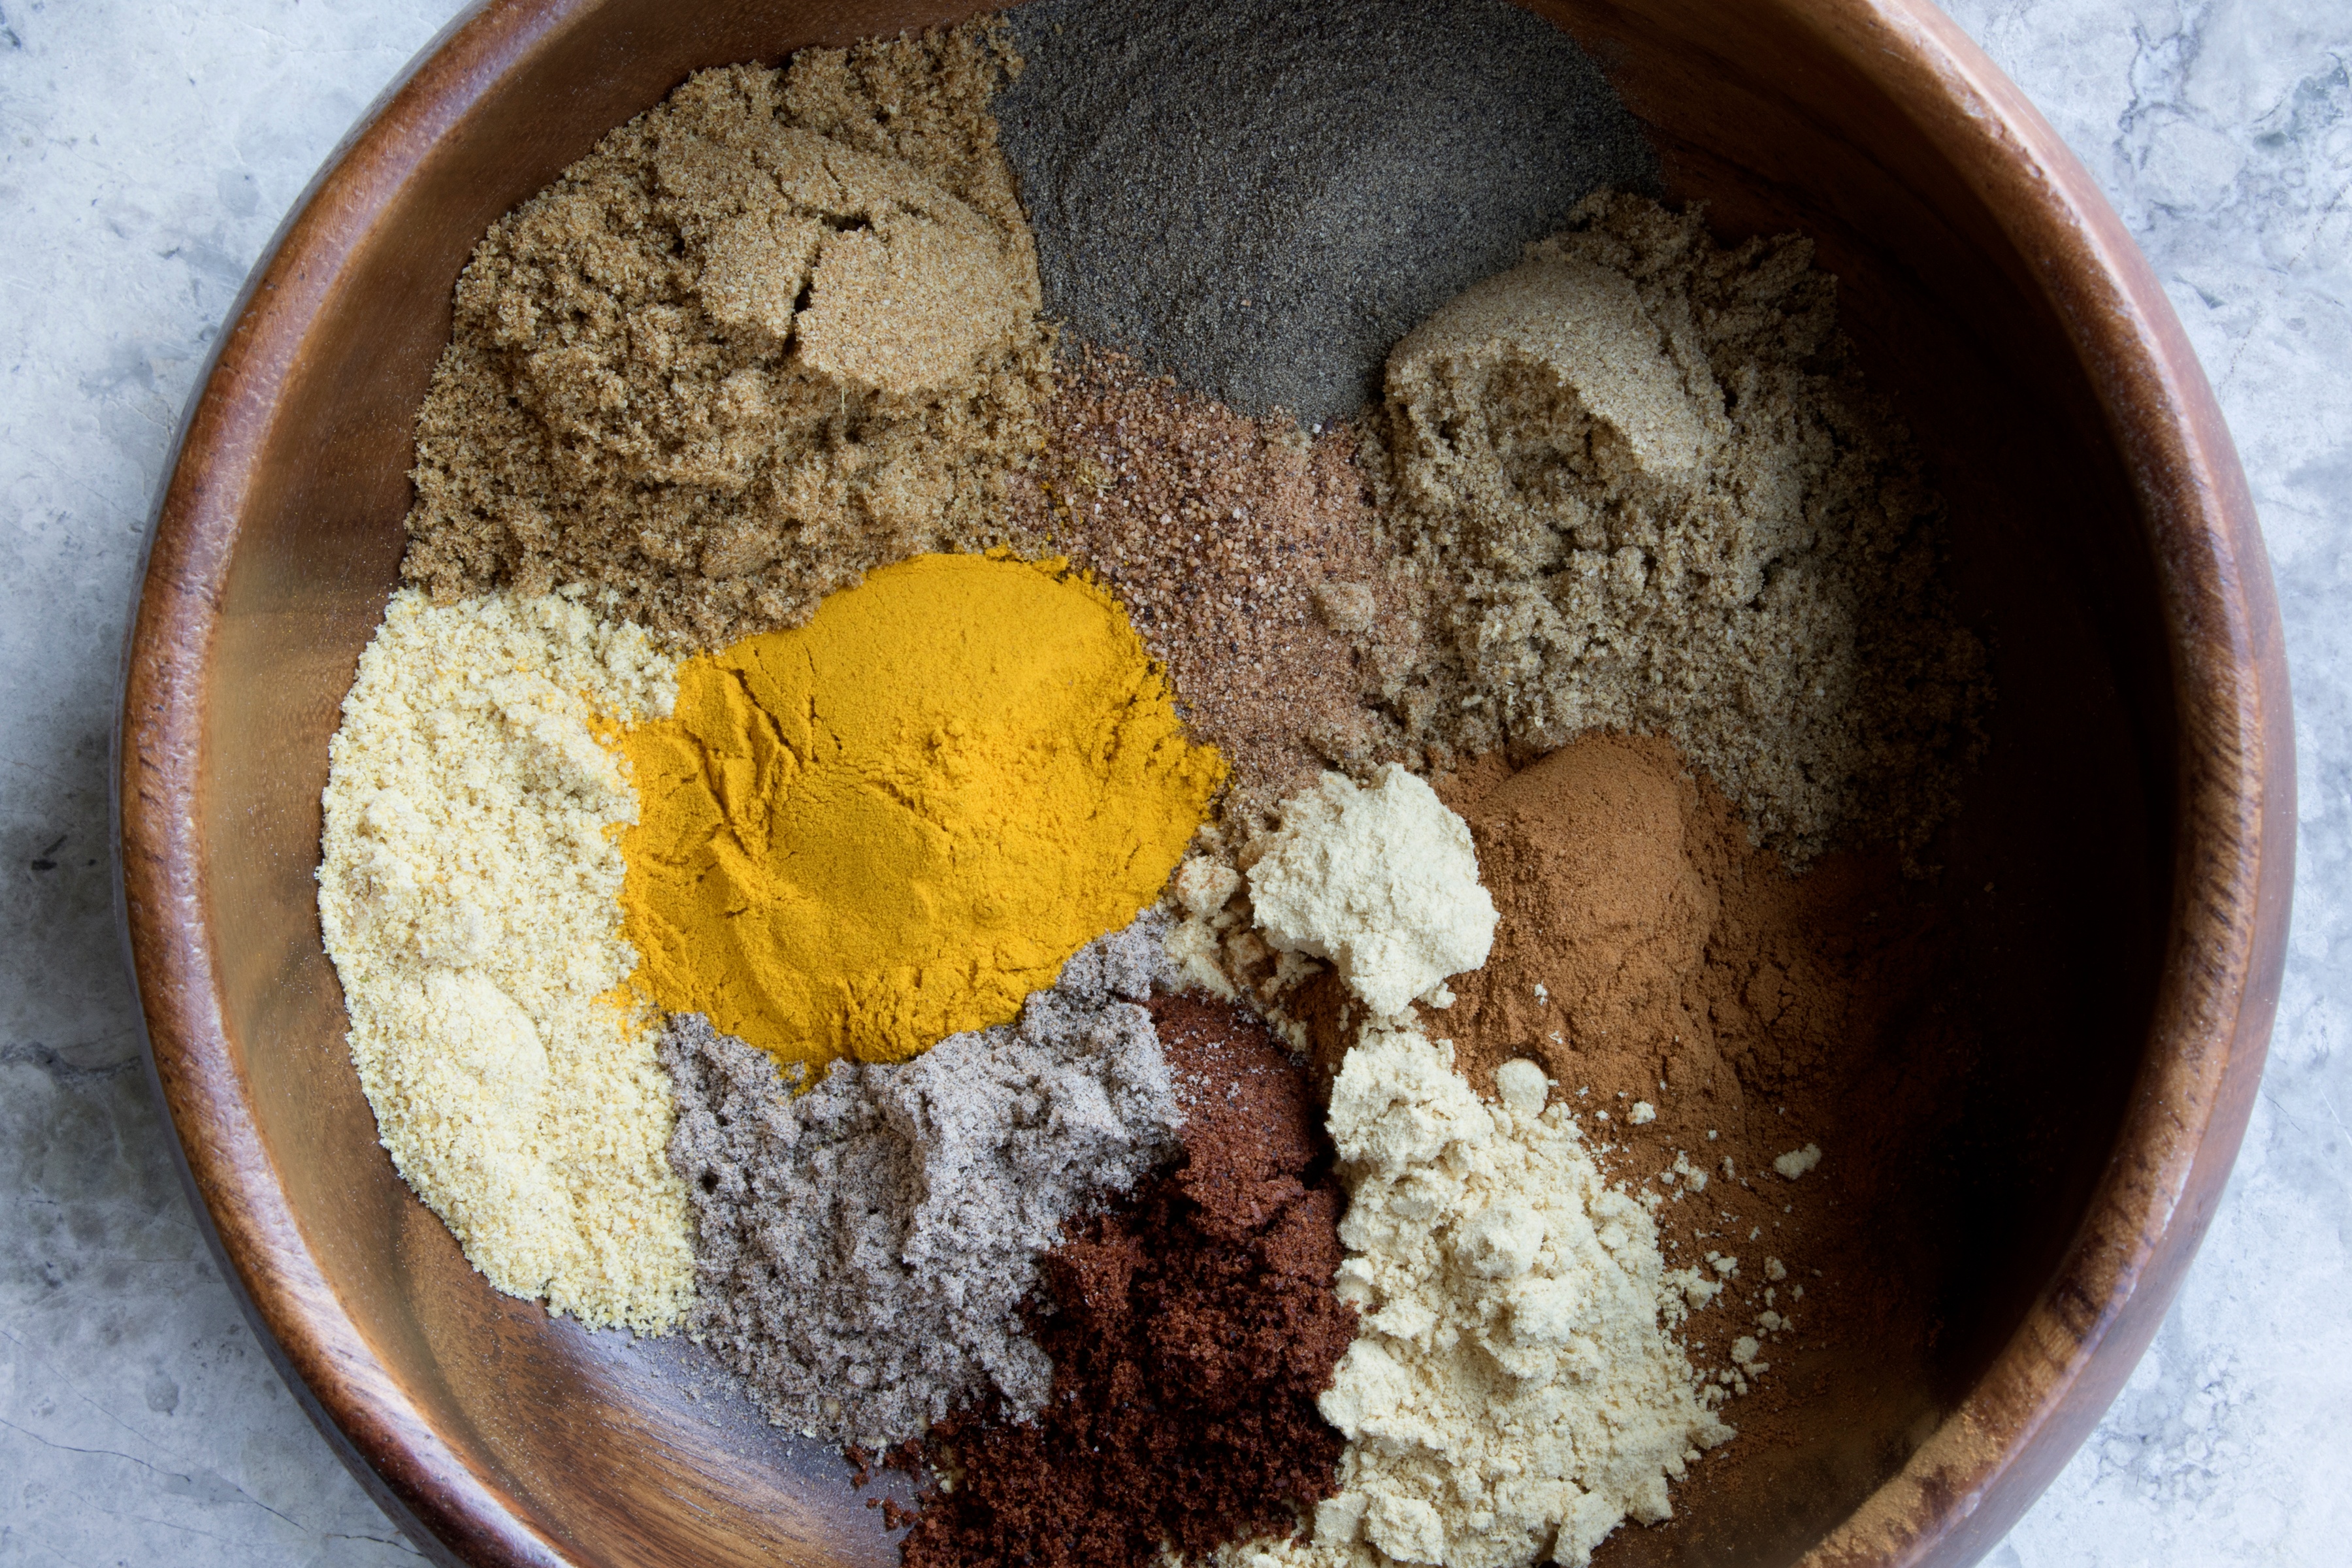 Wooden bowl filled with vibrant colored powdered herbs and spices